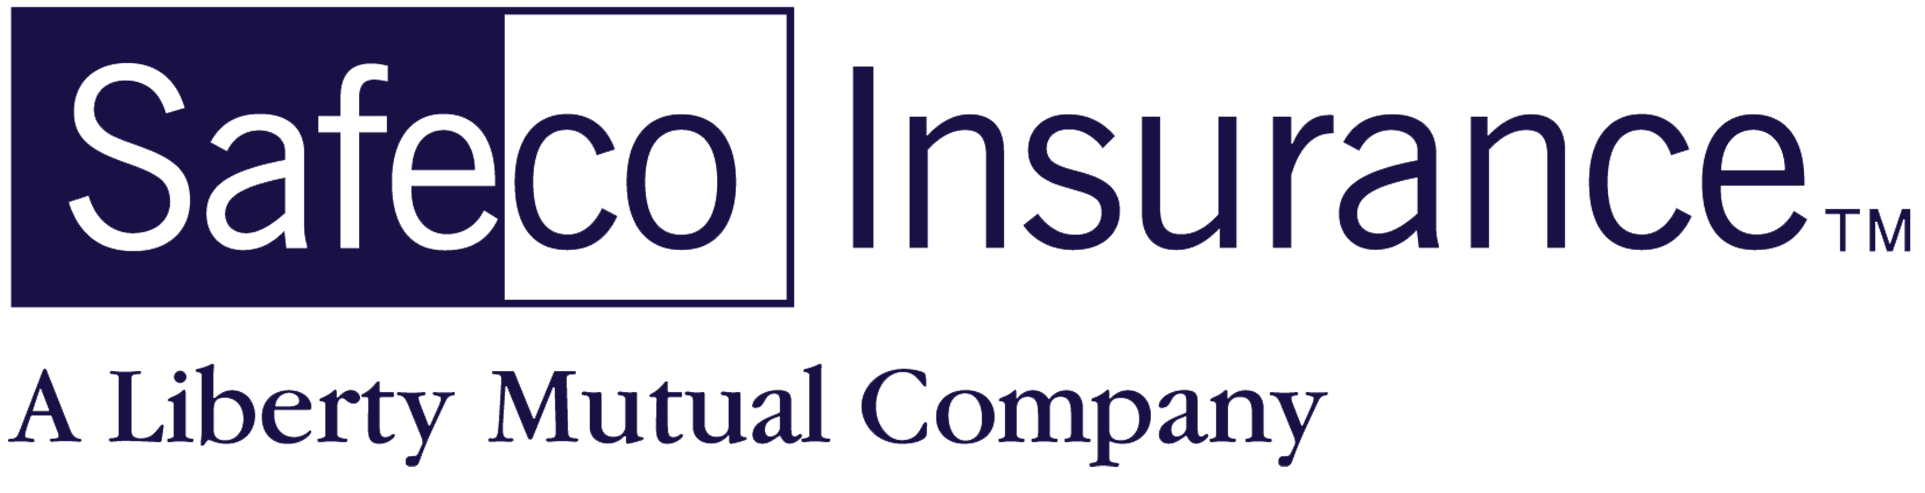 A black and purple logo for an insurance company.